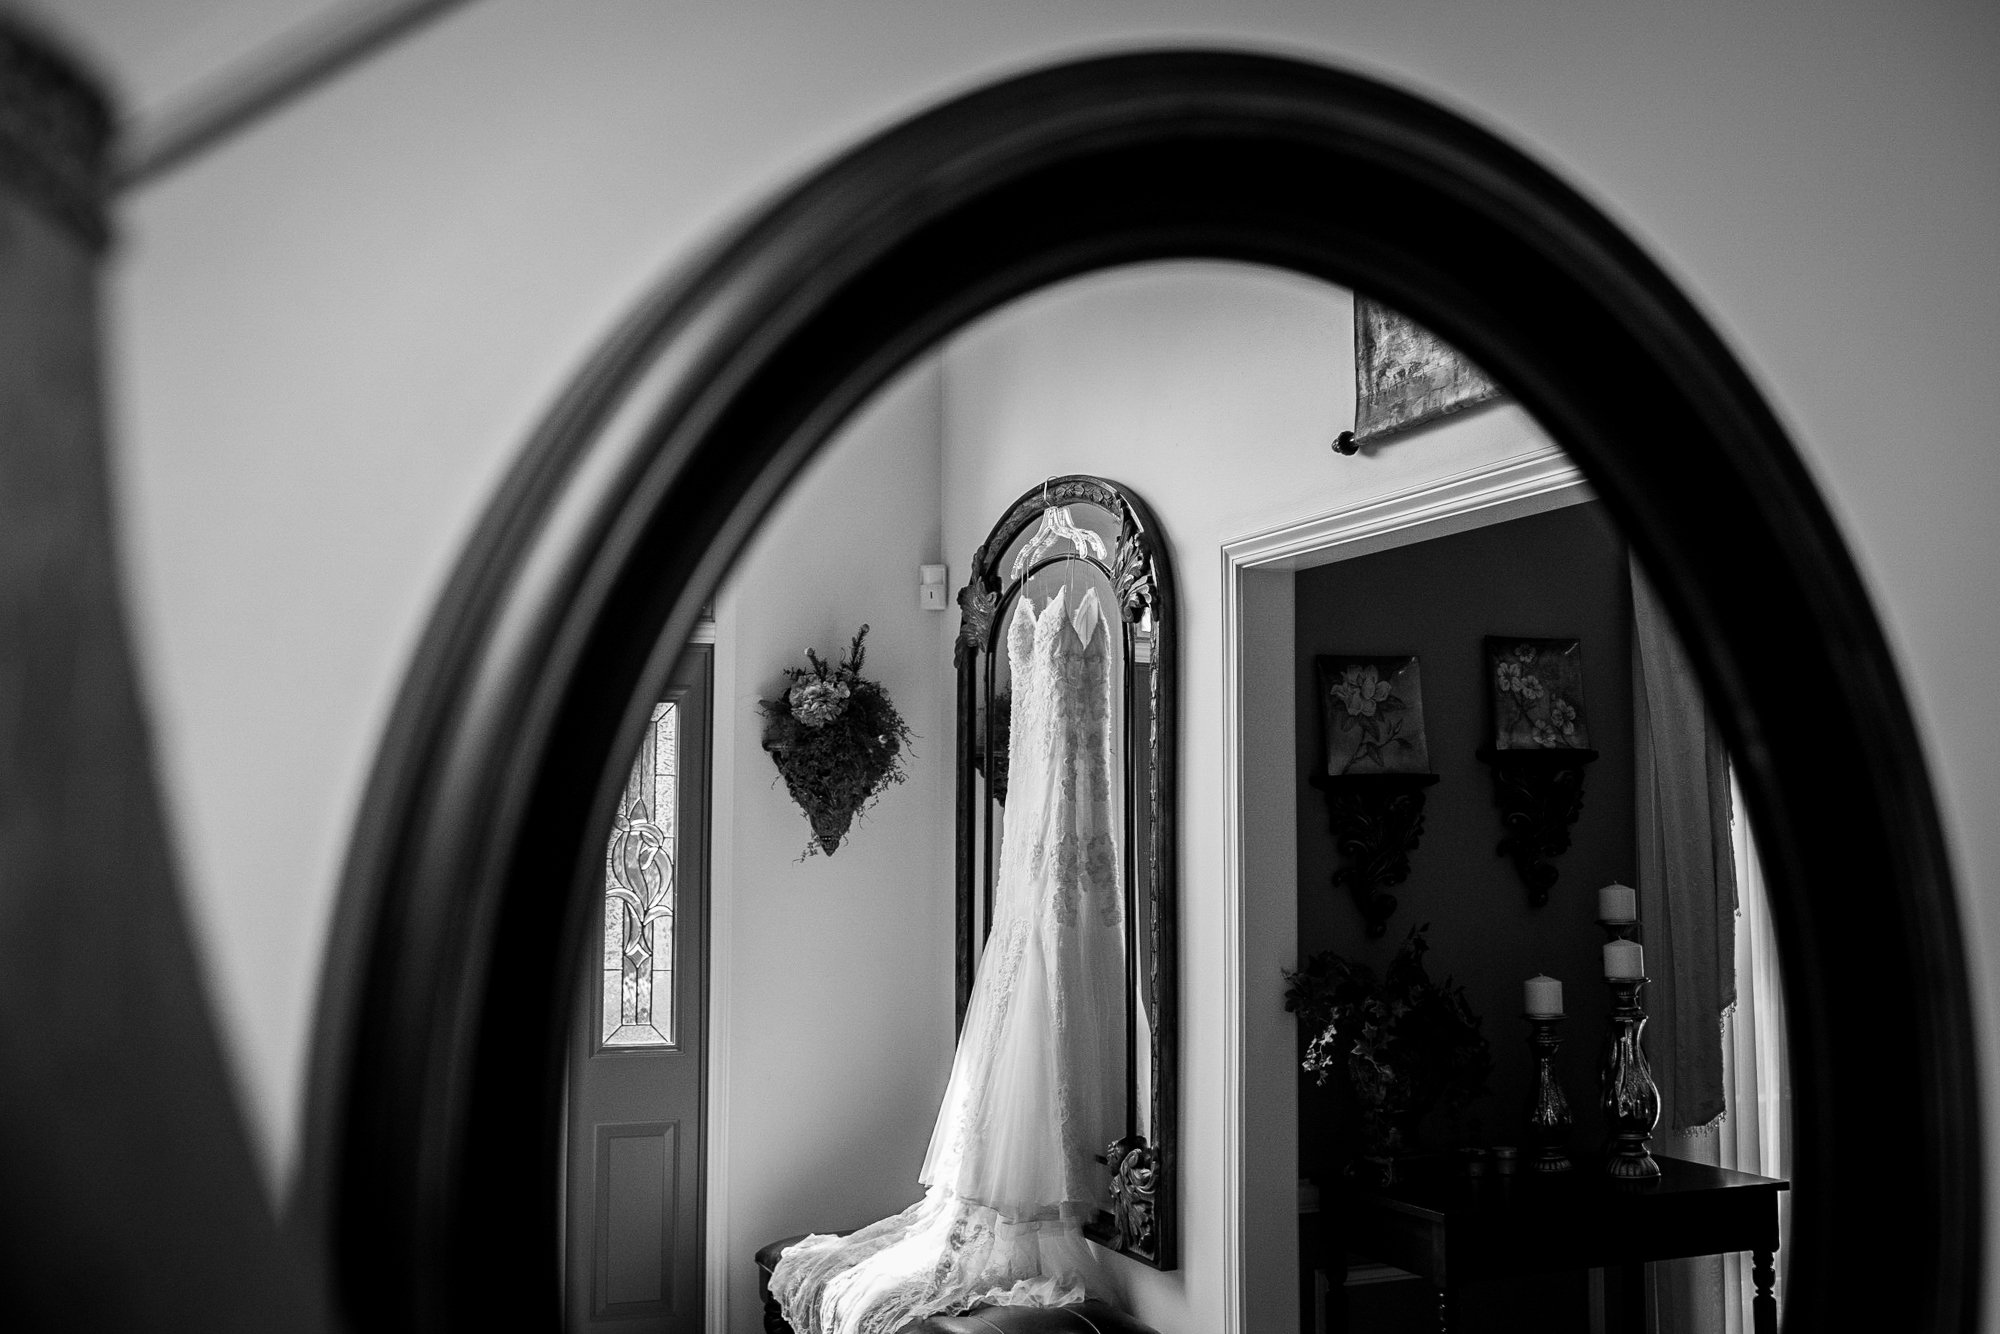 A wedding dress is reflected in a mirror before a Katherine Legge Memorial Lodge wedding.